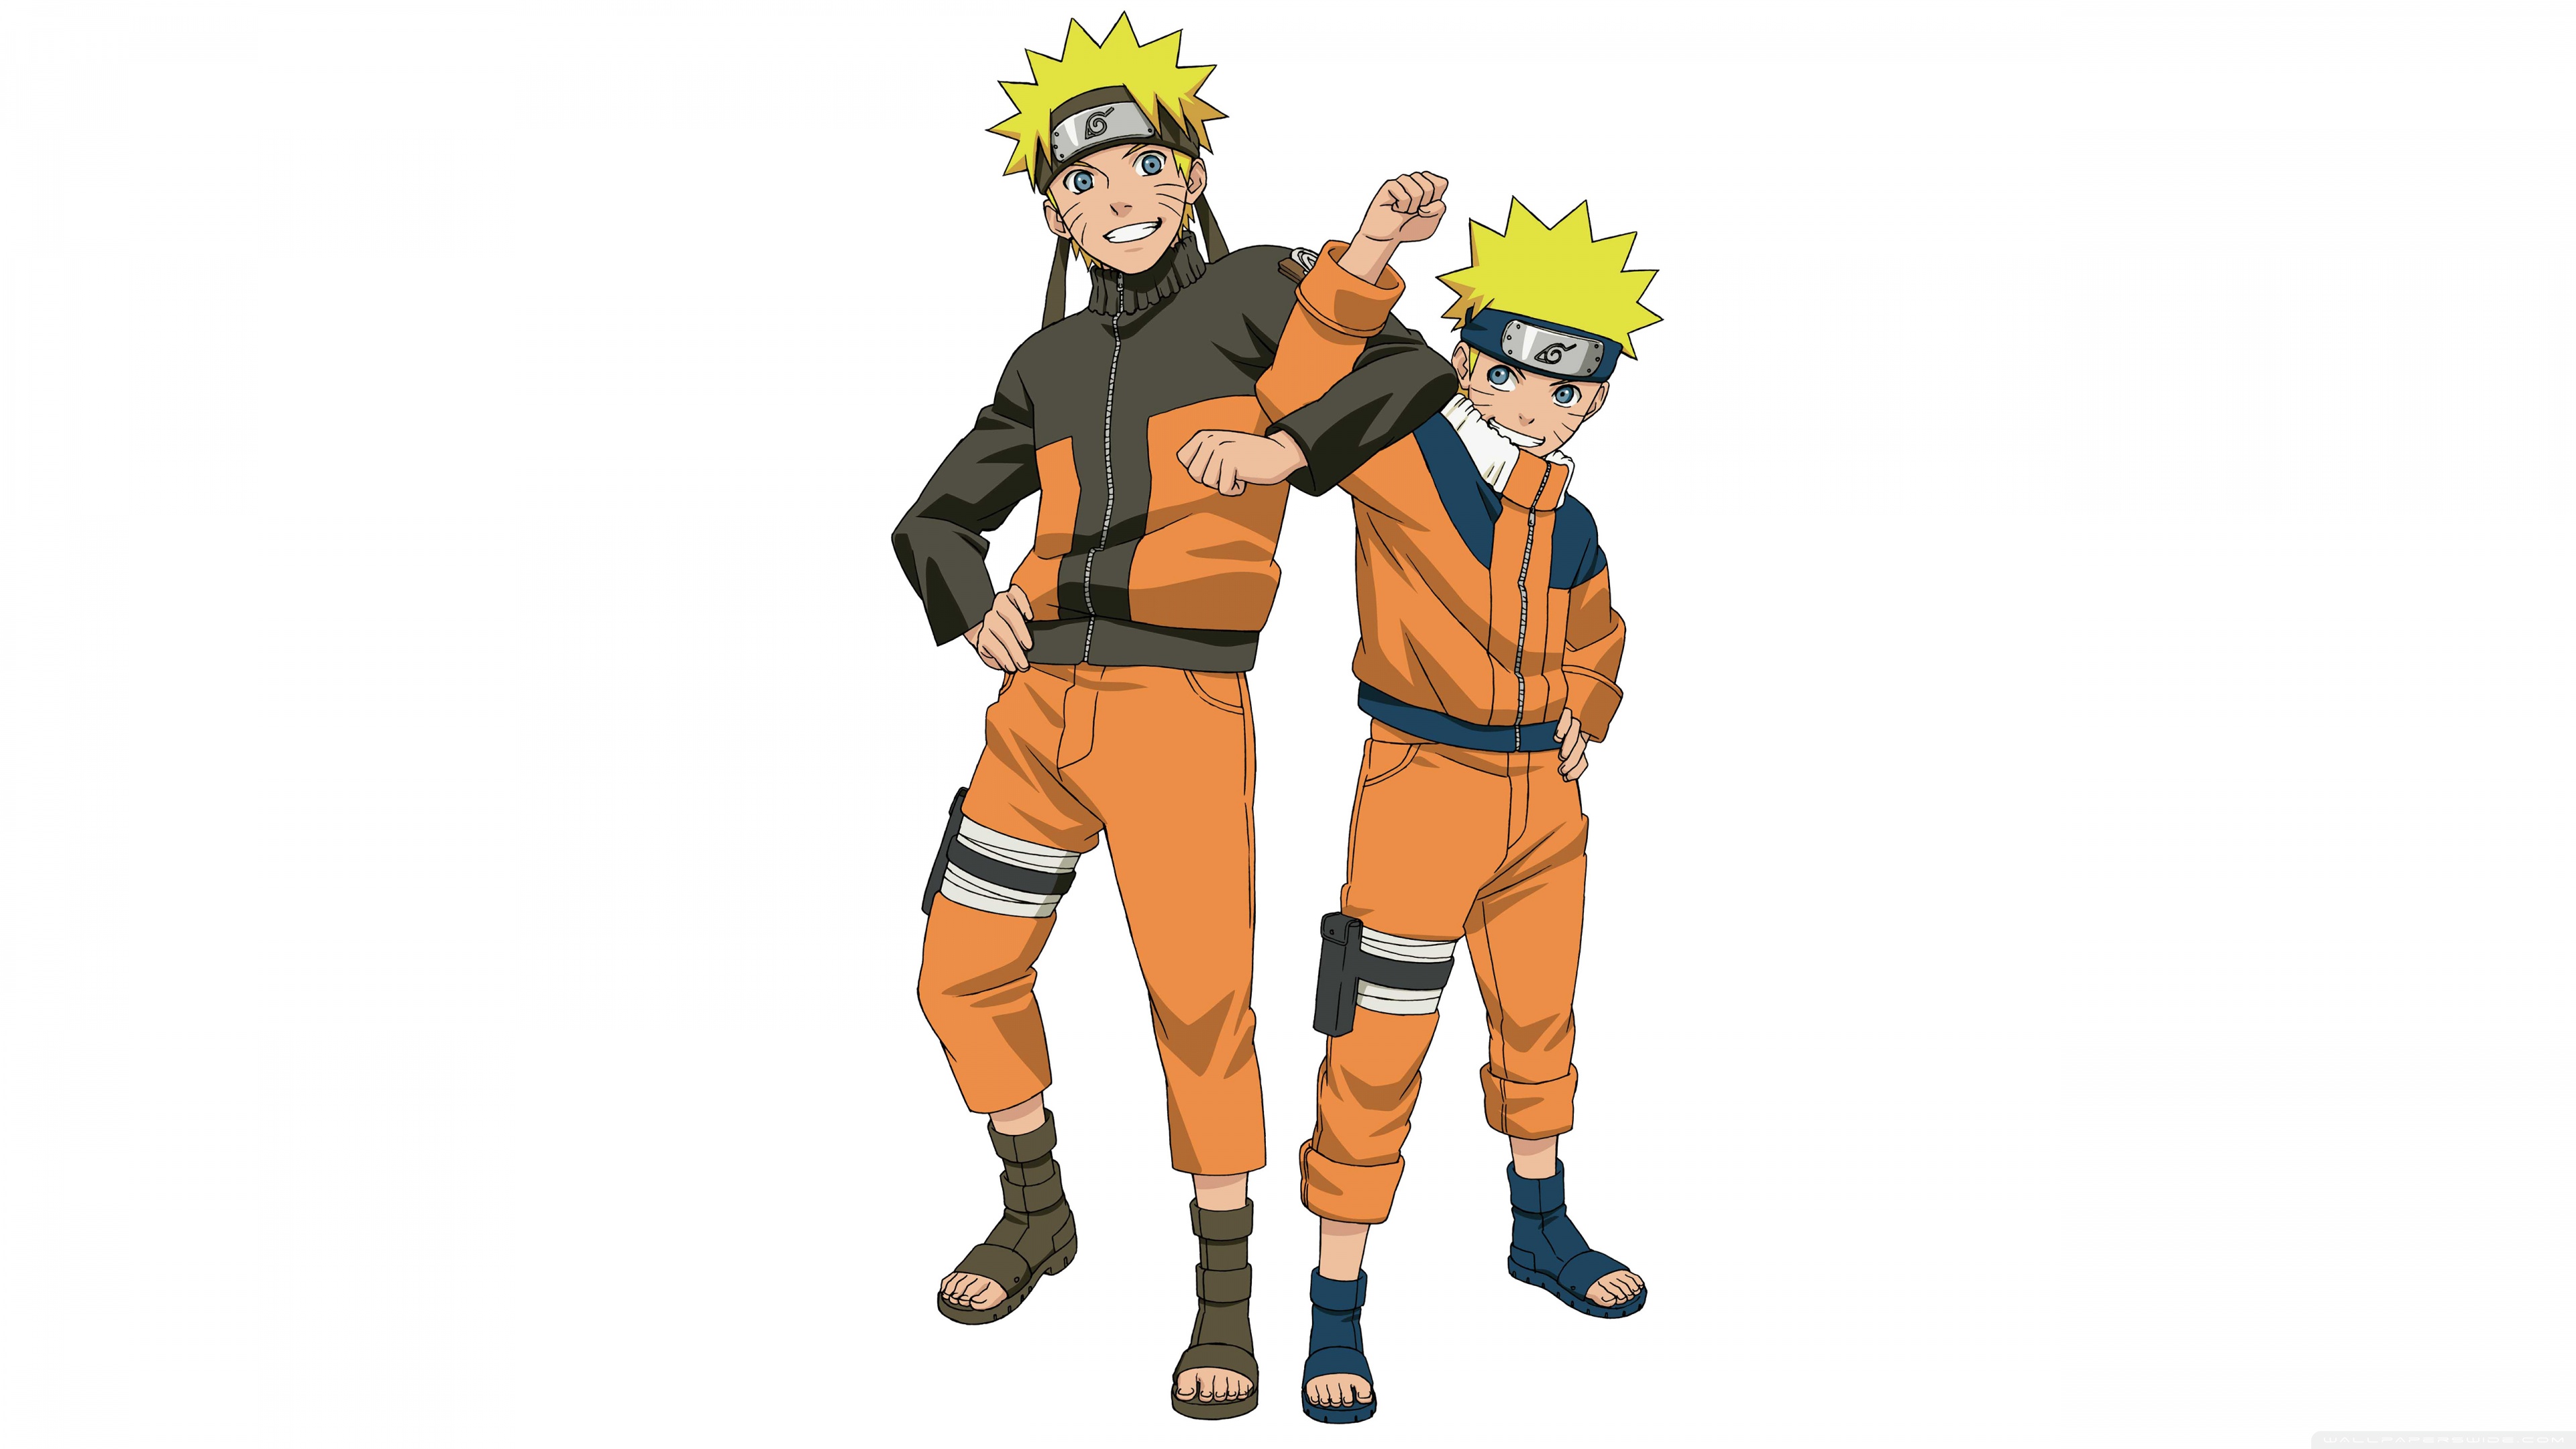 Naruto 4K wallpapers for your desktop or mobile screen free and easy to